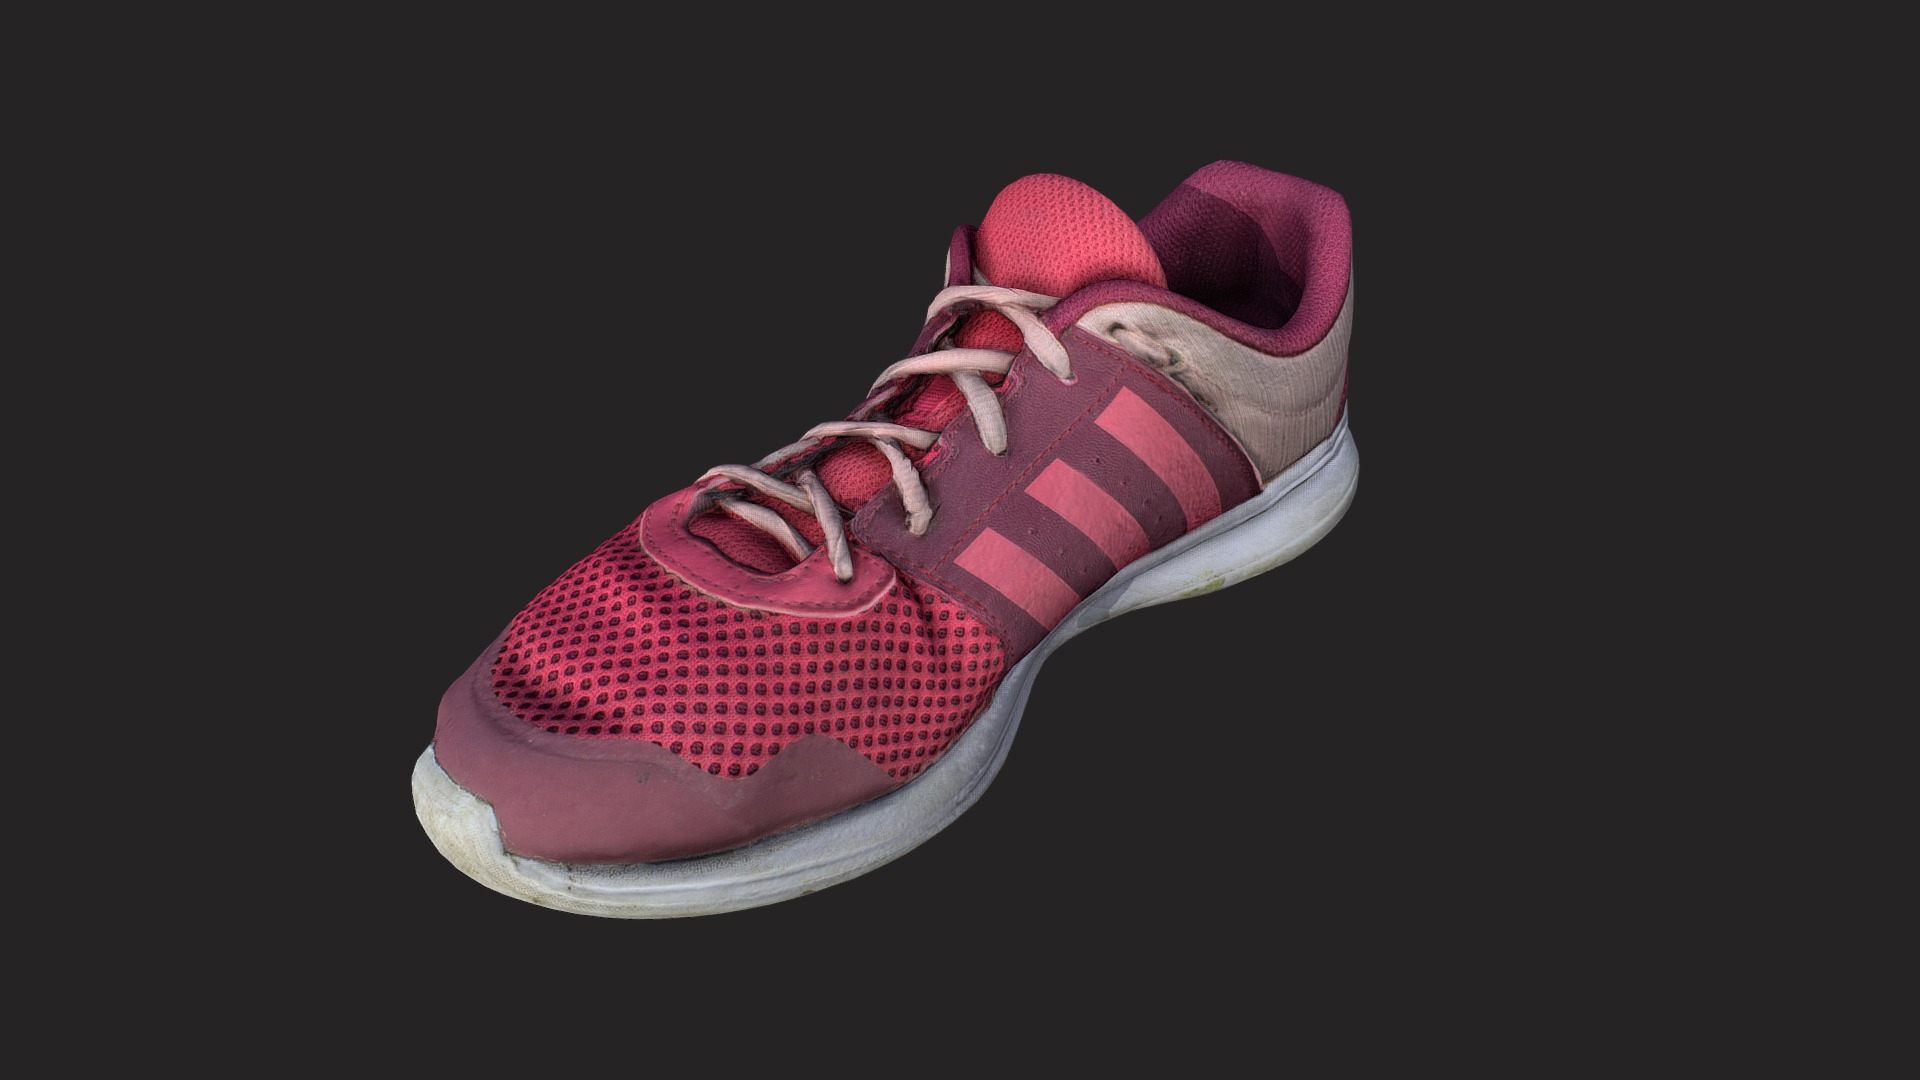 3D model Worn sneaker low poly - This is a 3D model of the Worn sneaker low poly. The 3D model is about a pink and white shoe.